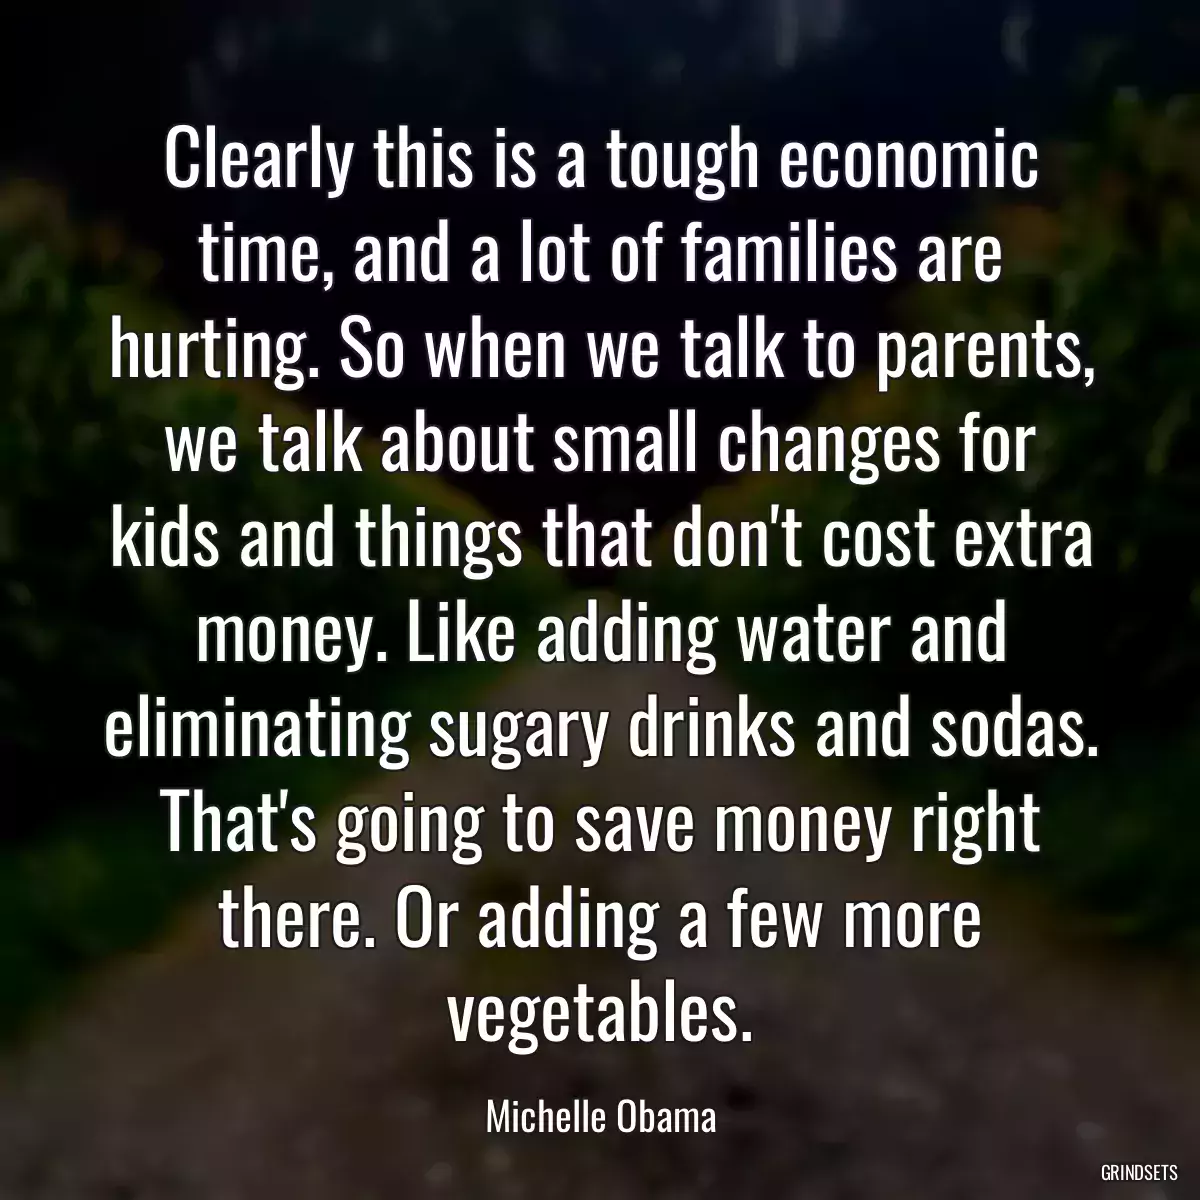 Clearly this is a tough economic time, and a lot of families are hurting. So when we talk to parents, we talk about small changes for kids and things that don\'t cost extra money. Like adding water and eliminating sugary drinks and sodas. That\'s going to save money right there. Or adding a few more vegetables.